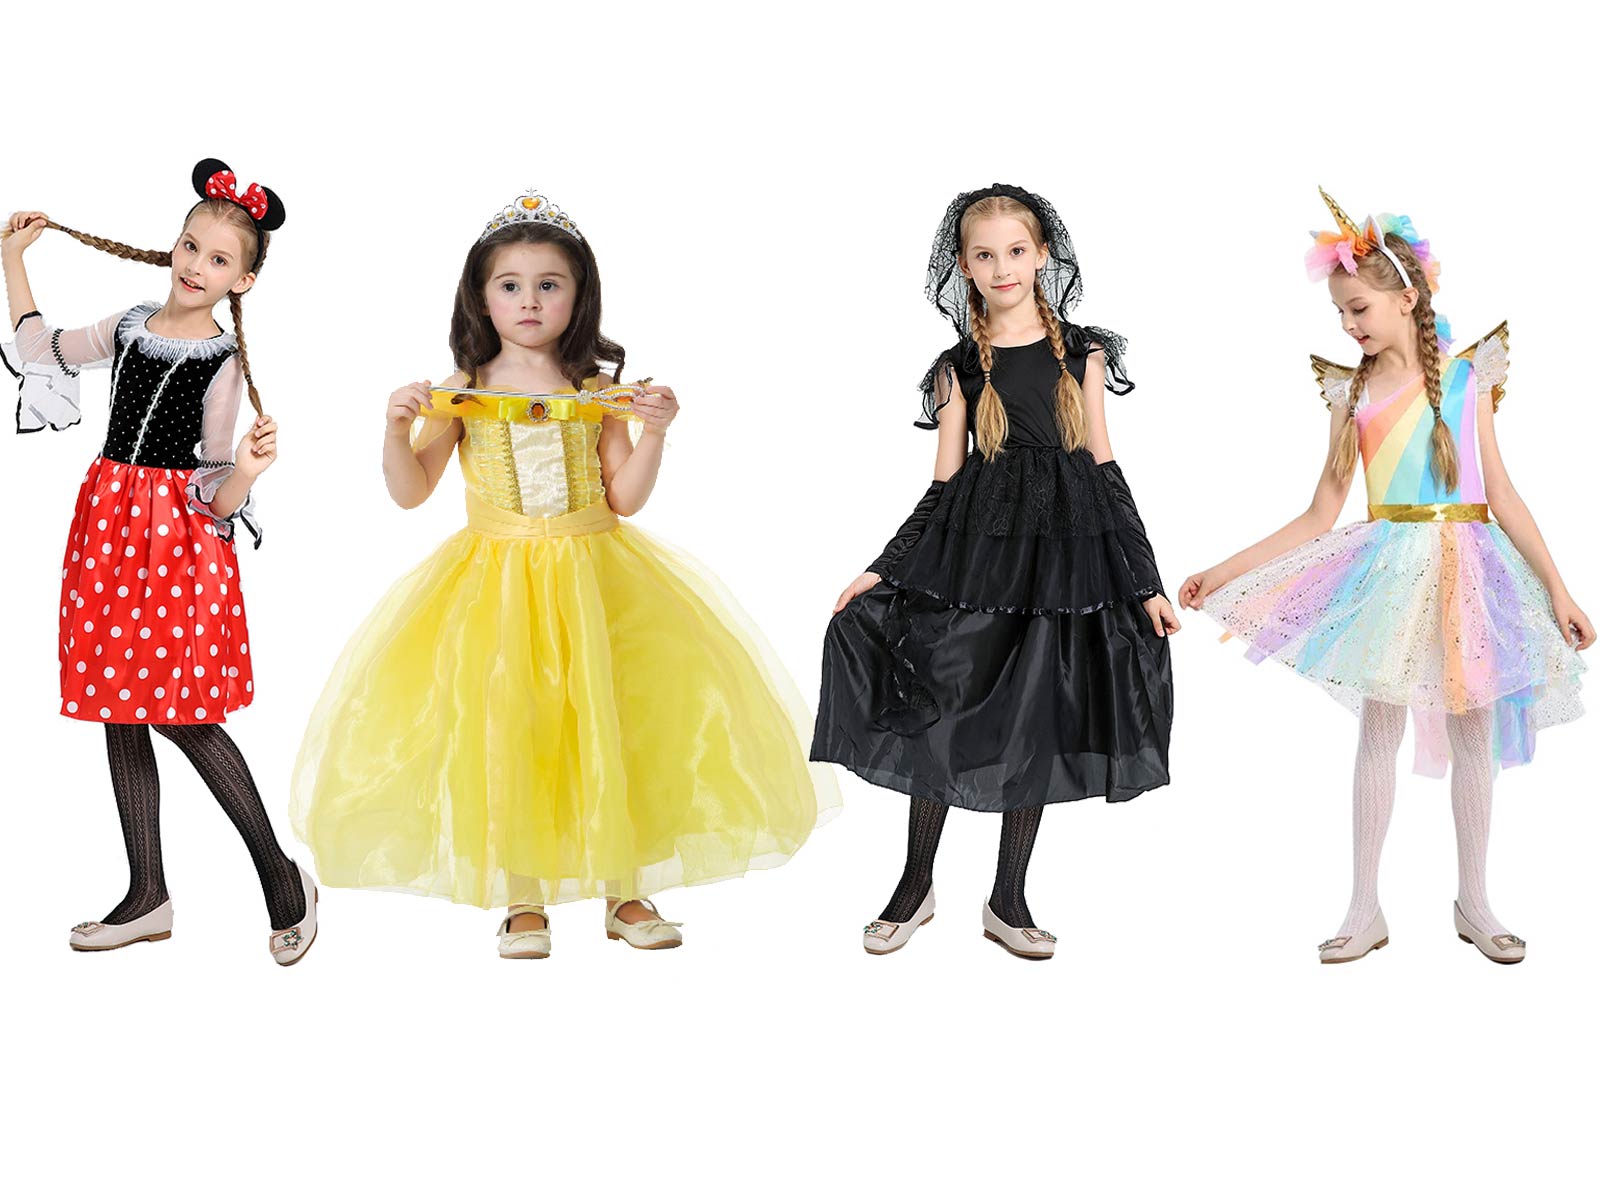 Heyli has developed many new princess dresses and IP costumes